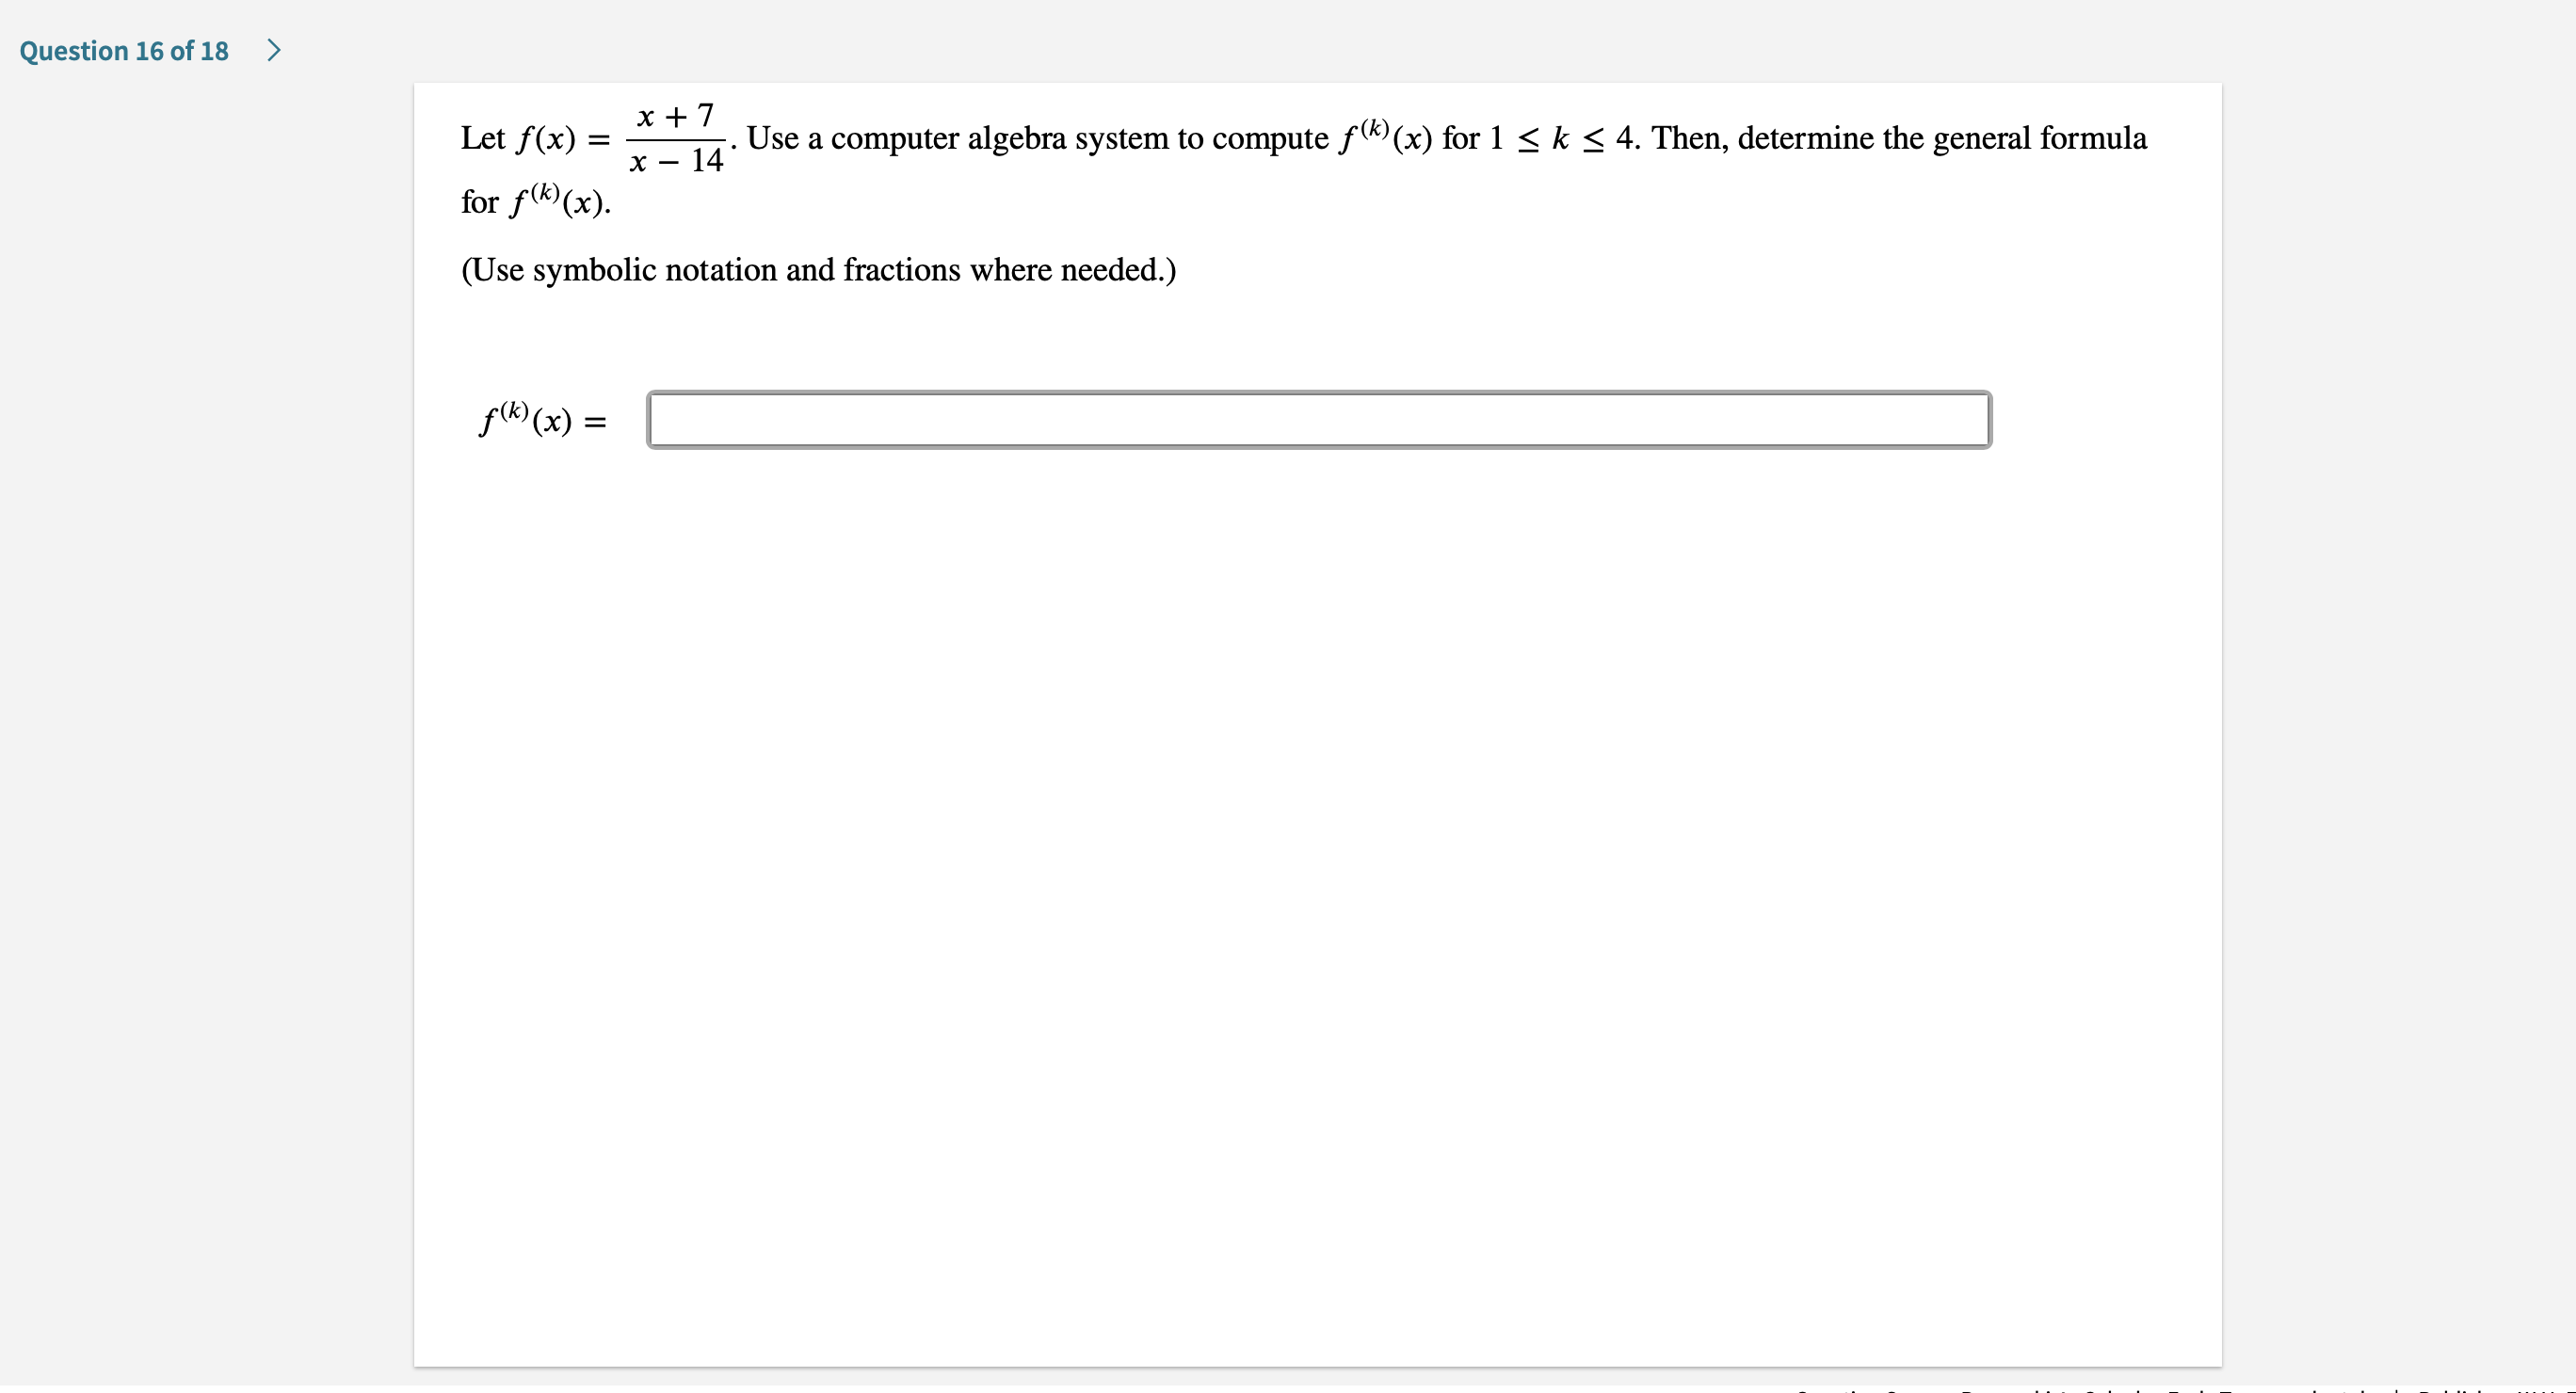 Question 16 of 18
х+7
Let f(x)
Use a computer algebra system to compute f((x) for 1 < k < 4. Then, determine the general formula
- 14
х —
for f(x)
(Use symbolic notation and fractions where needed.)
f((x)=
